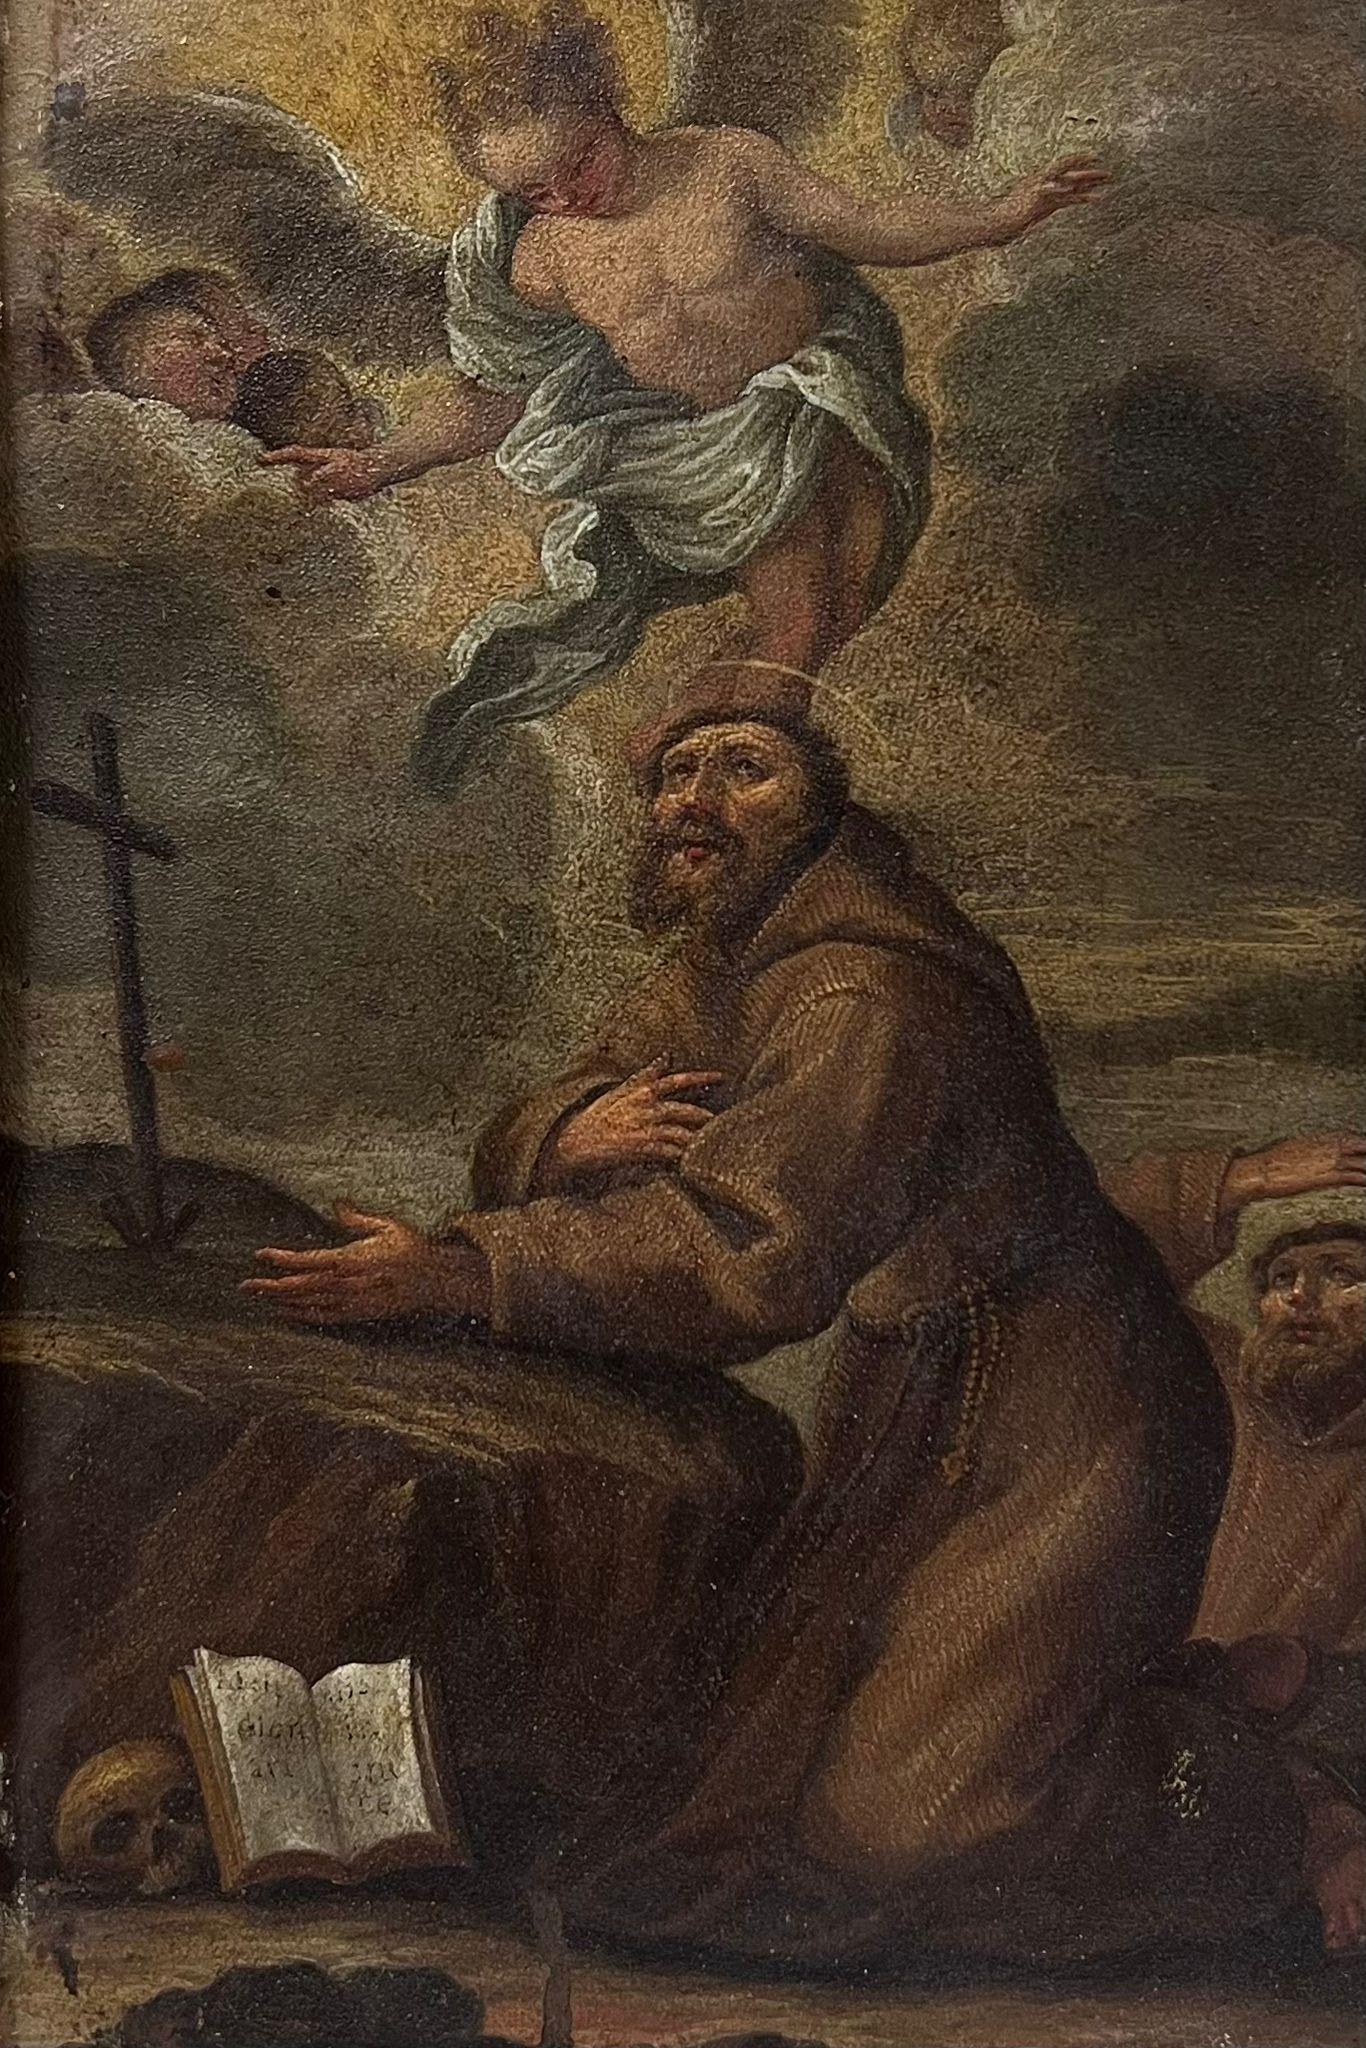 Italian 17th Century Old Master Figurative Painting - Penitent Saint in Wilderness with Angels & Cherubs Italian Old Master on Copper